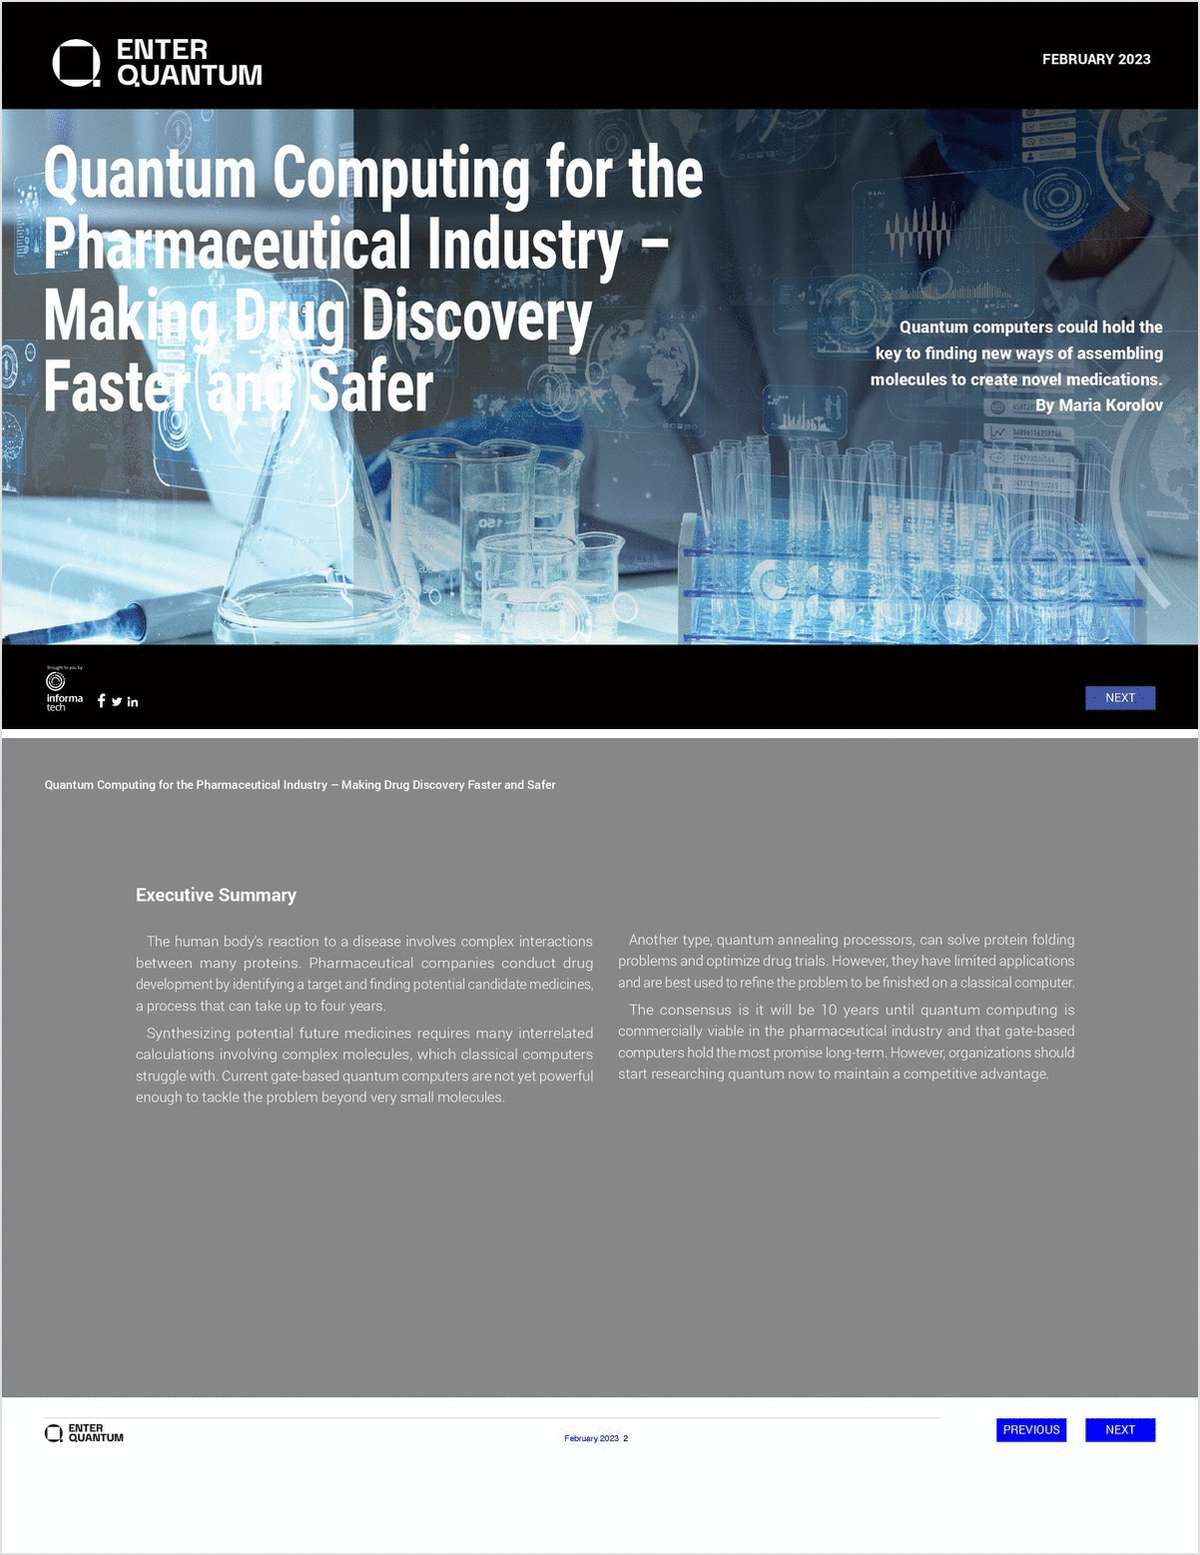 Quantum Computing for the Pharmaceutical Industry